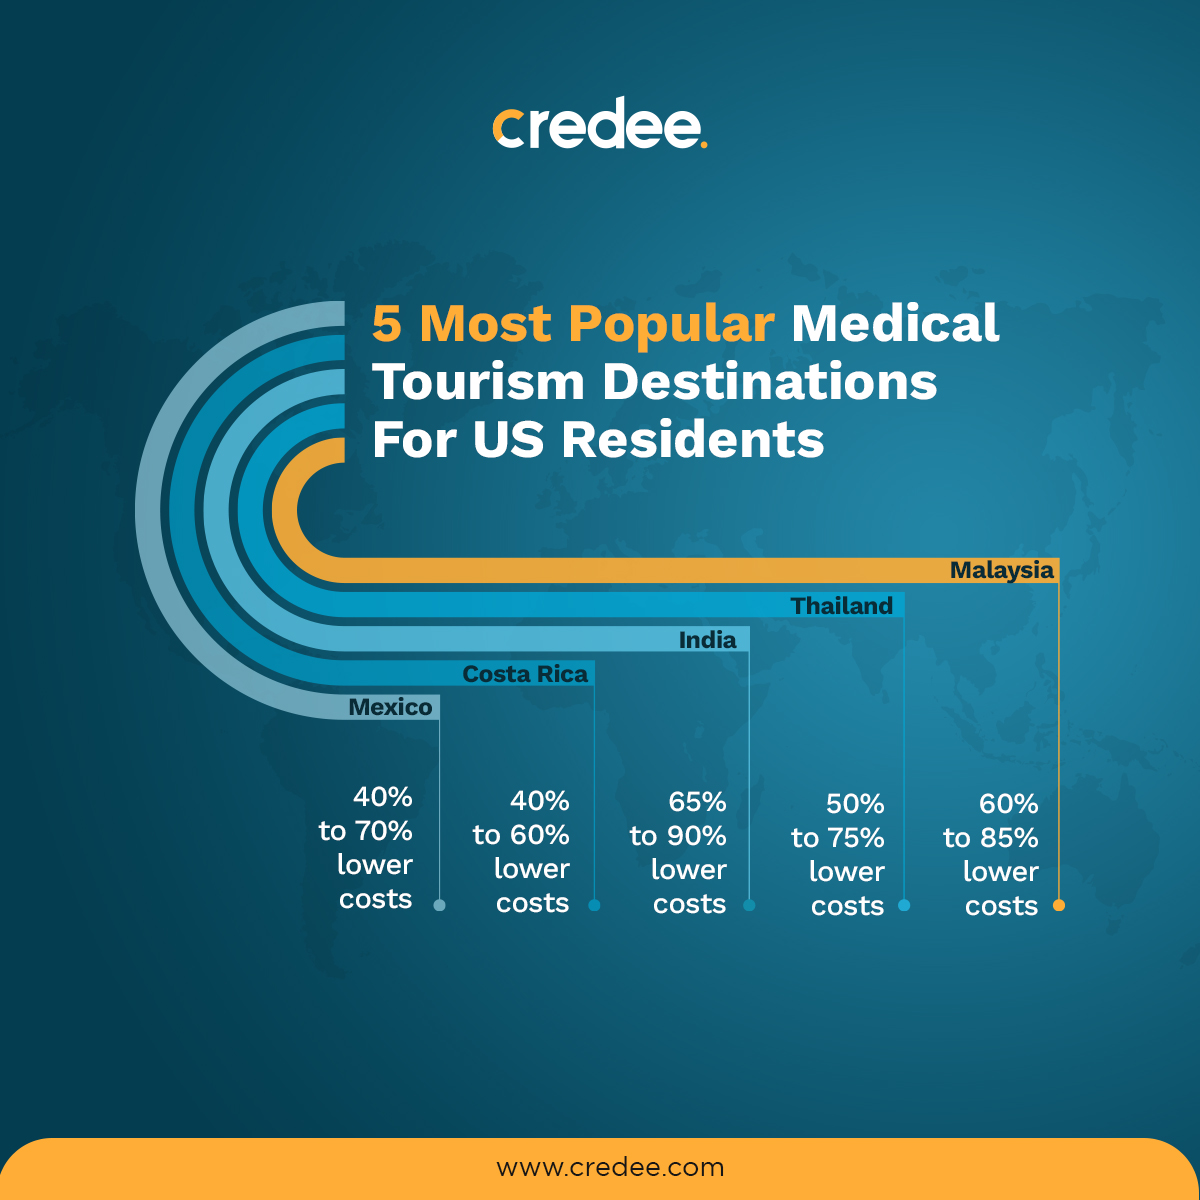 Medical tourism has gained popularity in recent years due to lower costs. However, it is not ideal for all types of medical surgeries. So, to counter the cost challenges, #healthcare providers can consider offering flexible #paymentplans with #Credee. Explore how Credee helps!